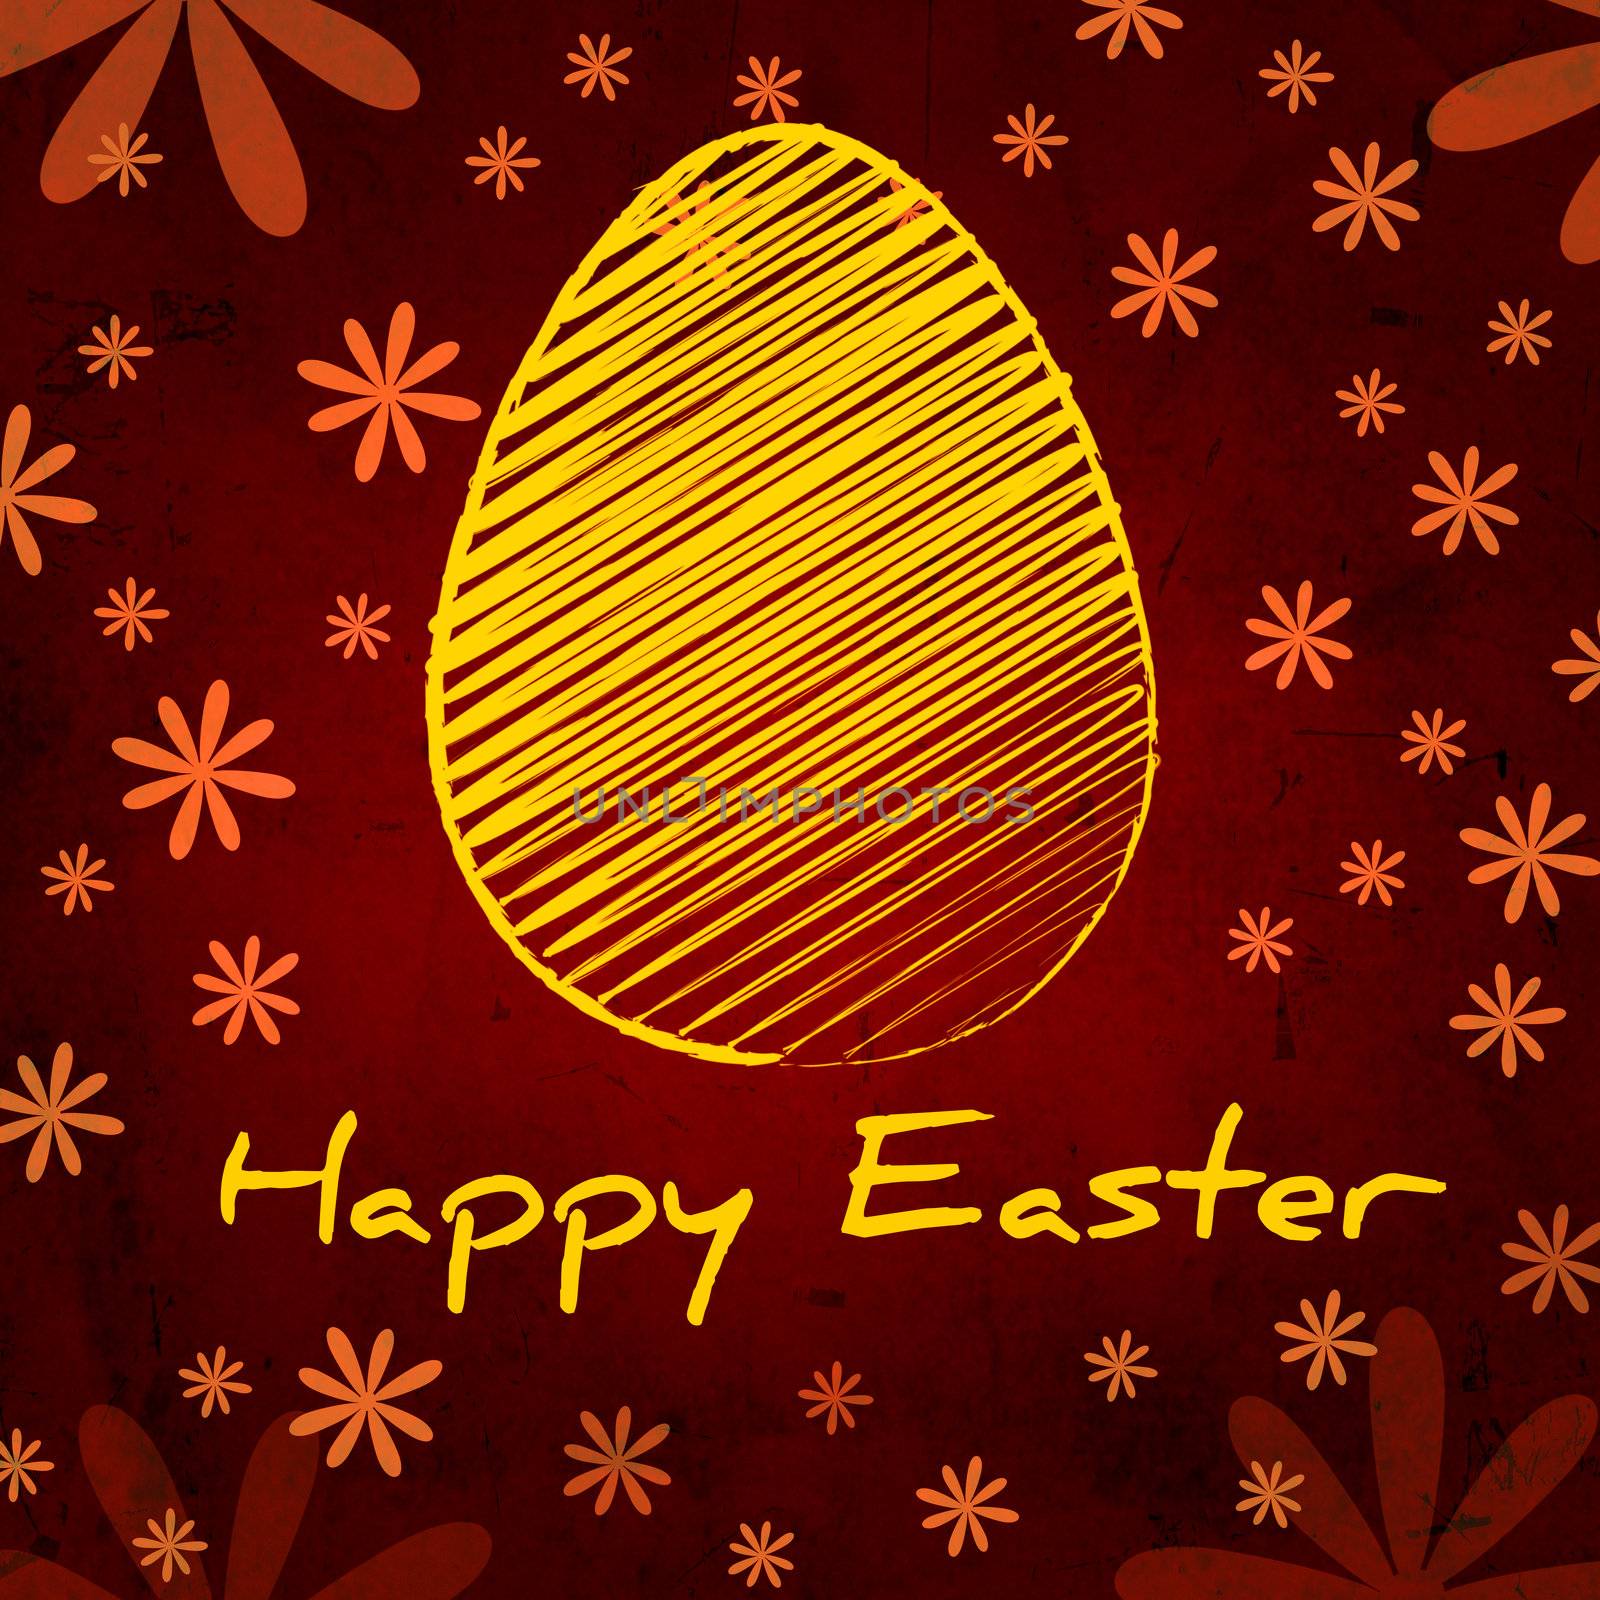 Happy Easter text and striped yellow egg, vintage background over brown old paper with daisy flowers